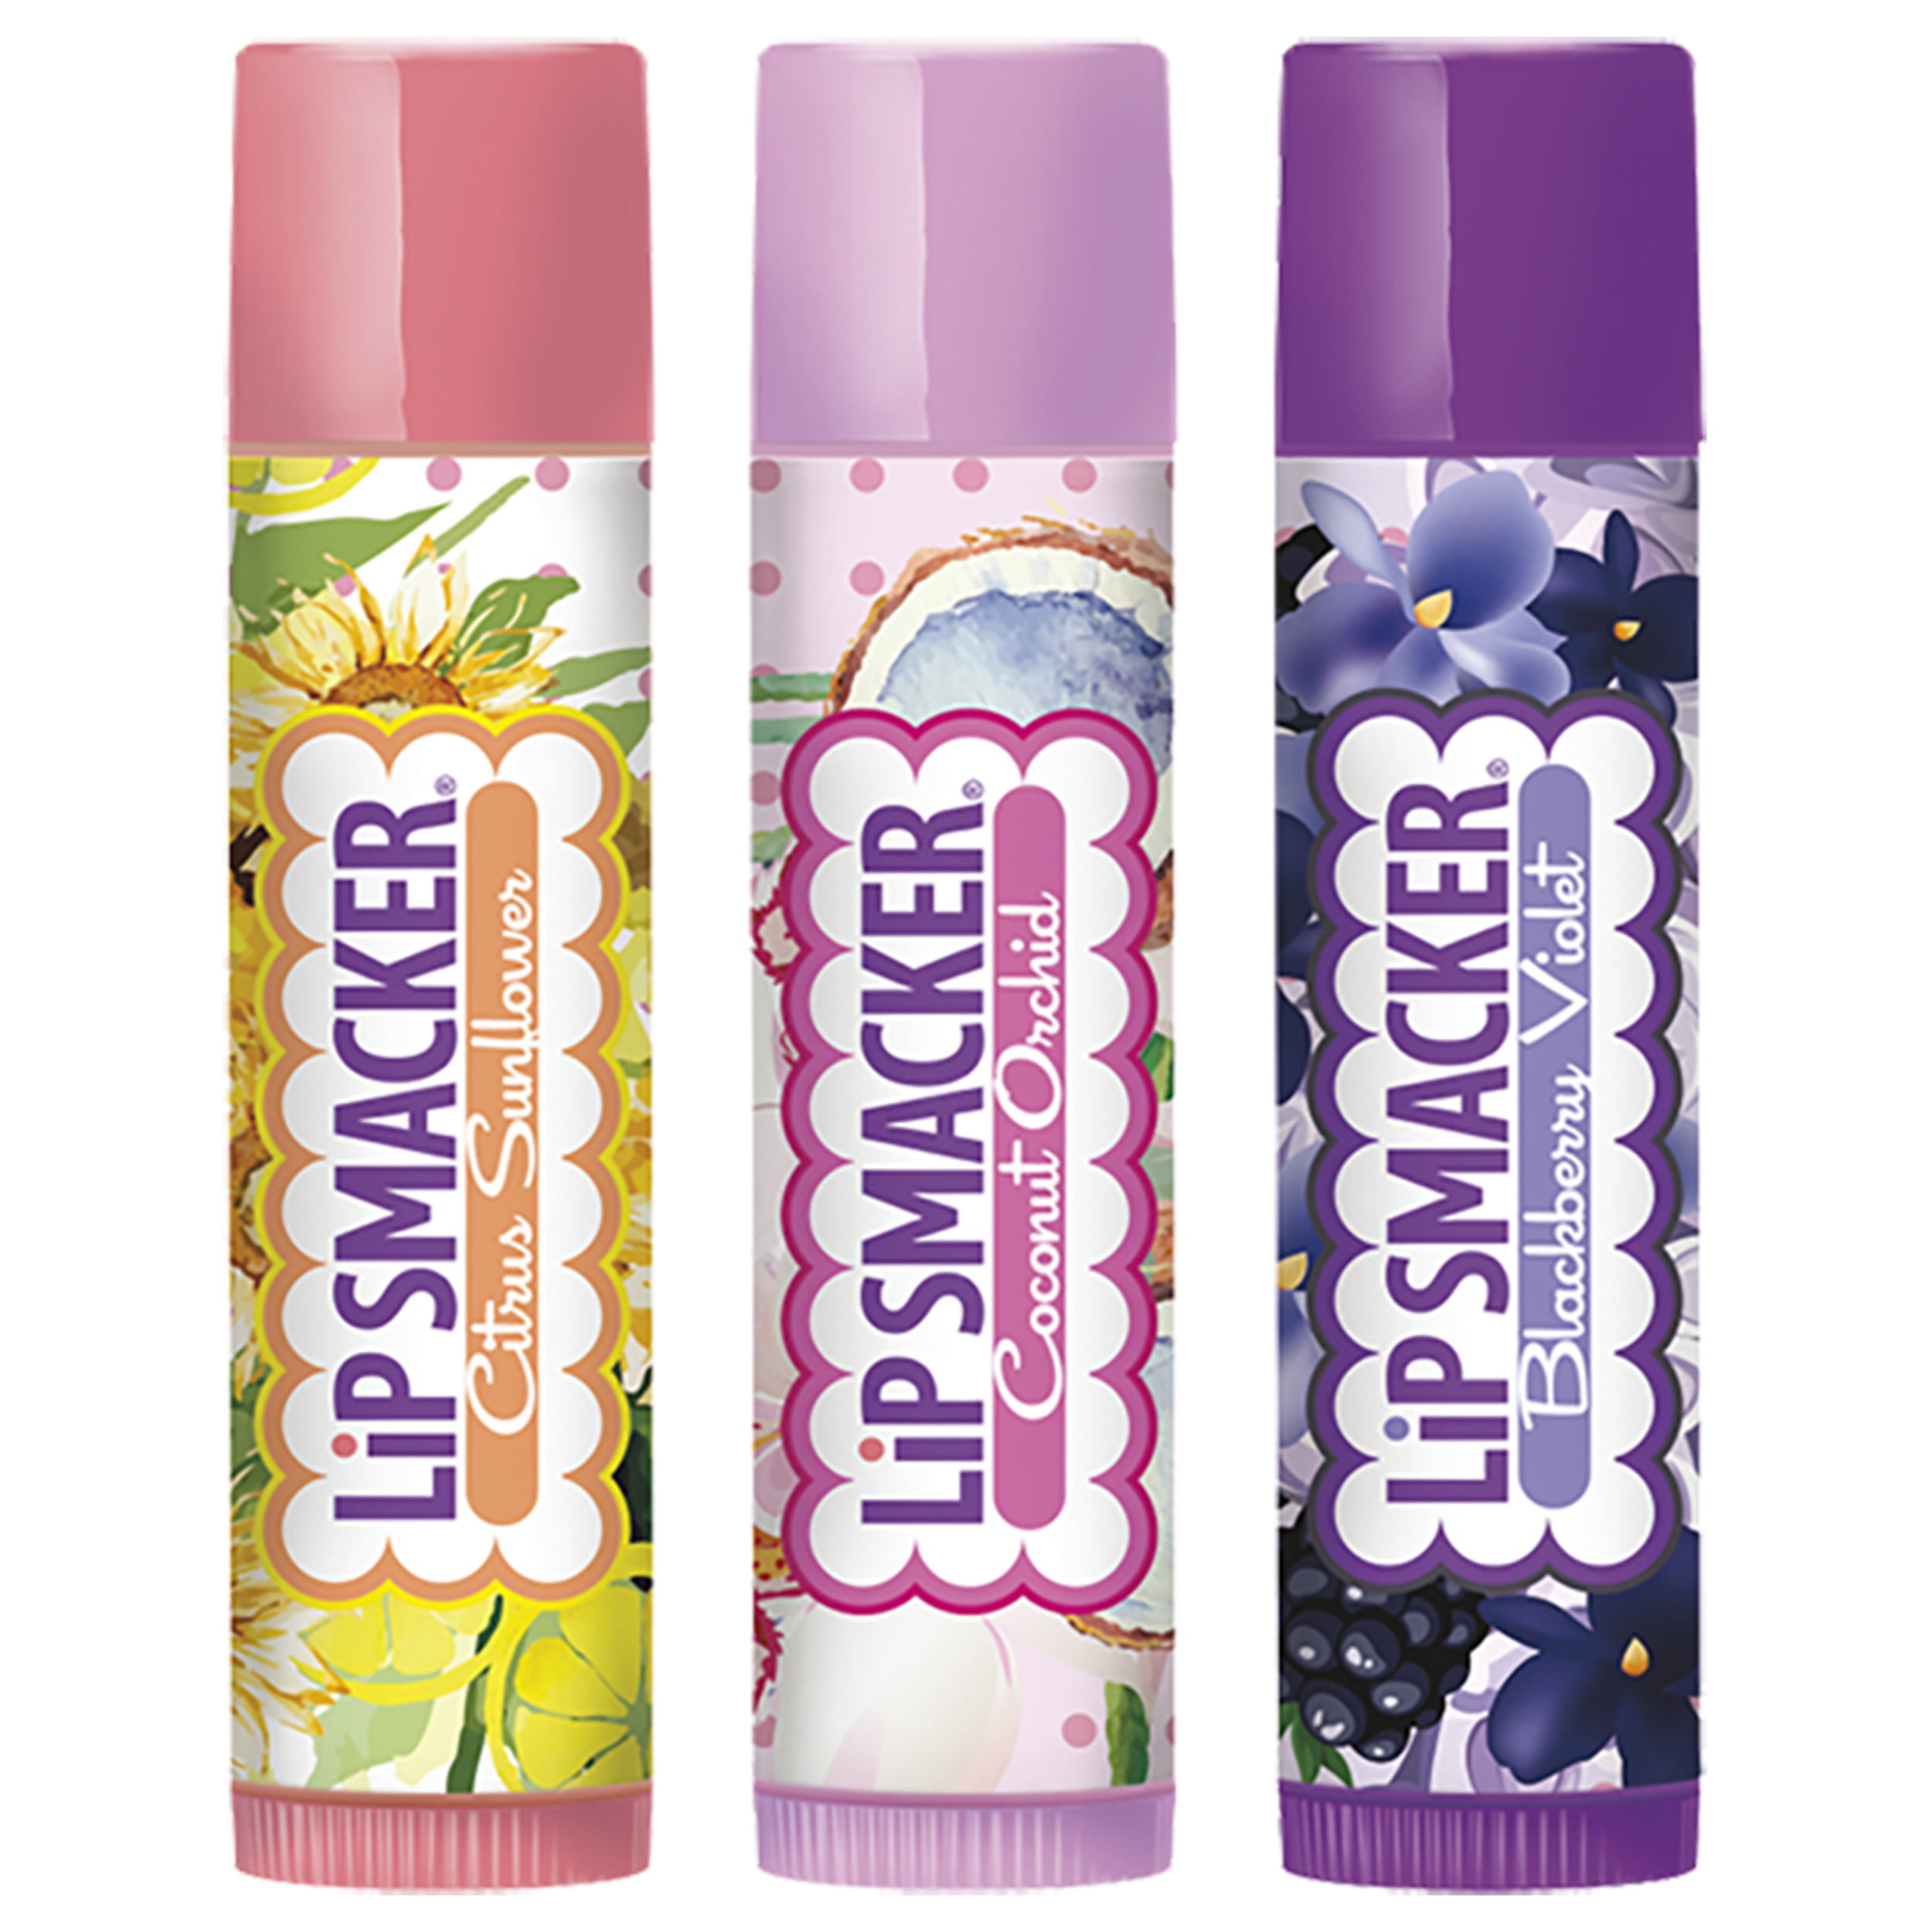 Markwins Bonnie Bell 8821372 Lip Smacker Floral Scent Lip Balm Trio - Pack  of 2 